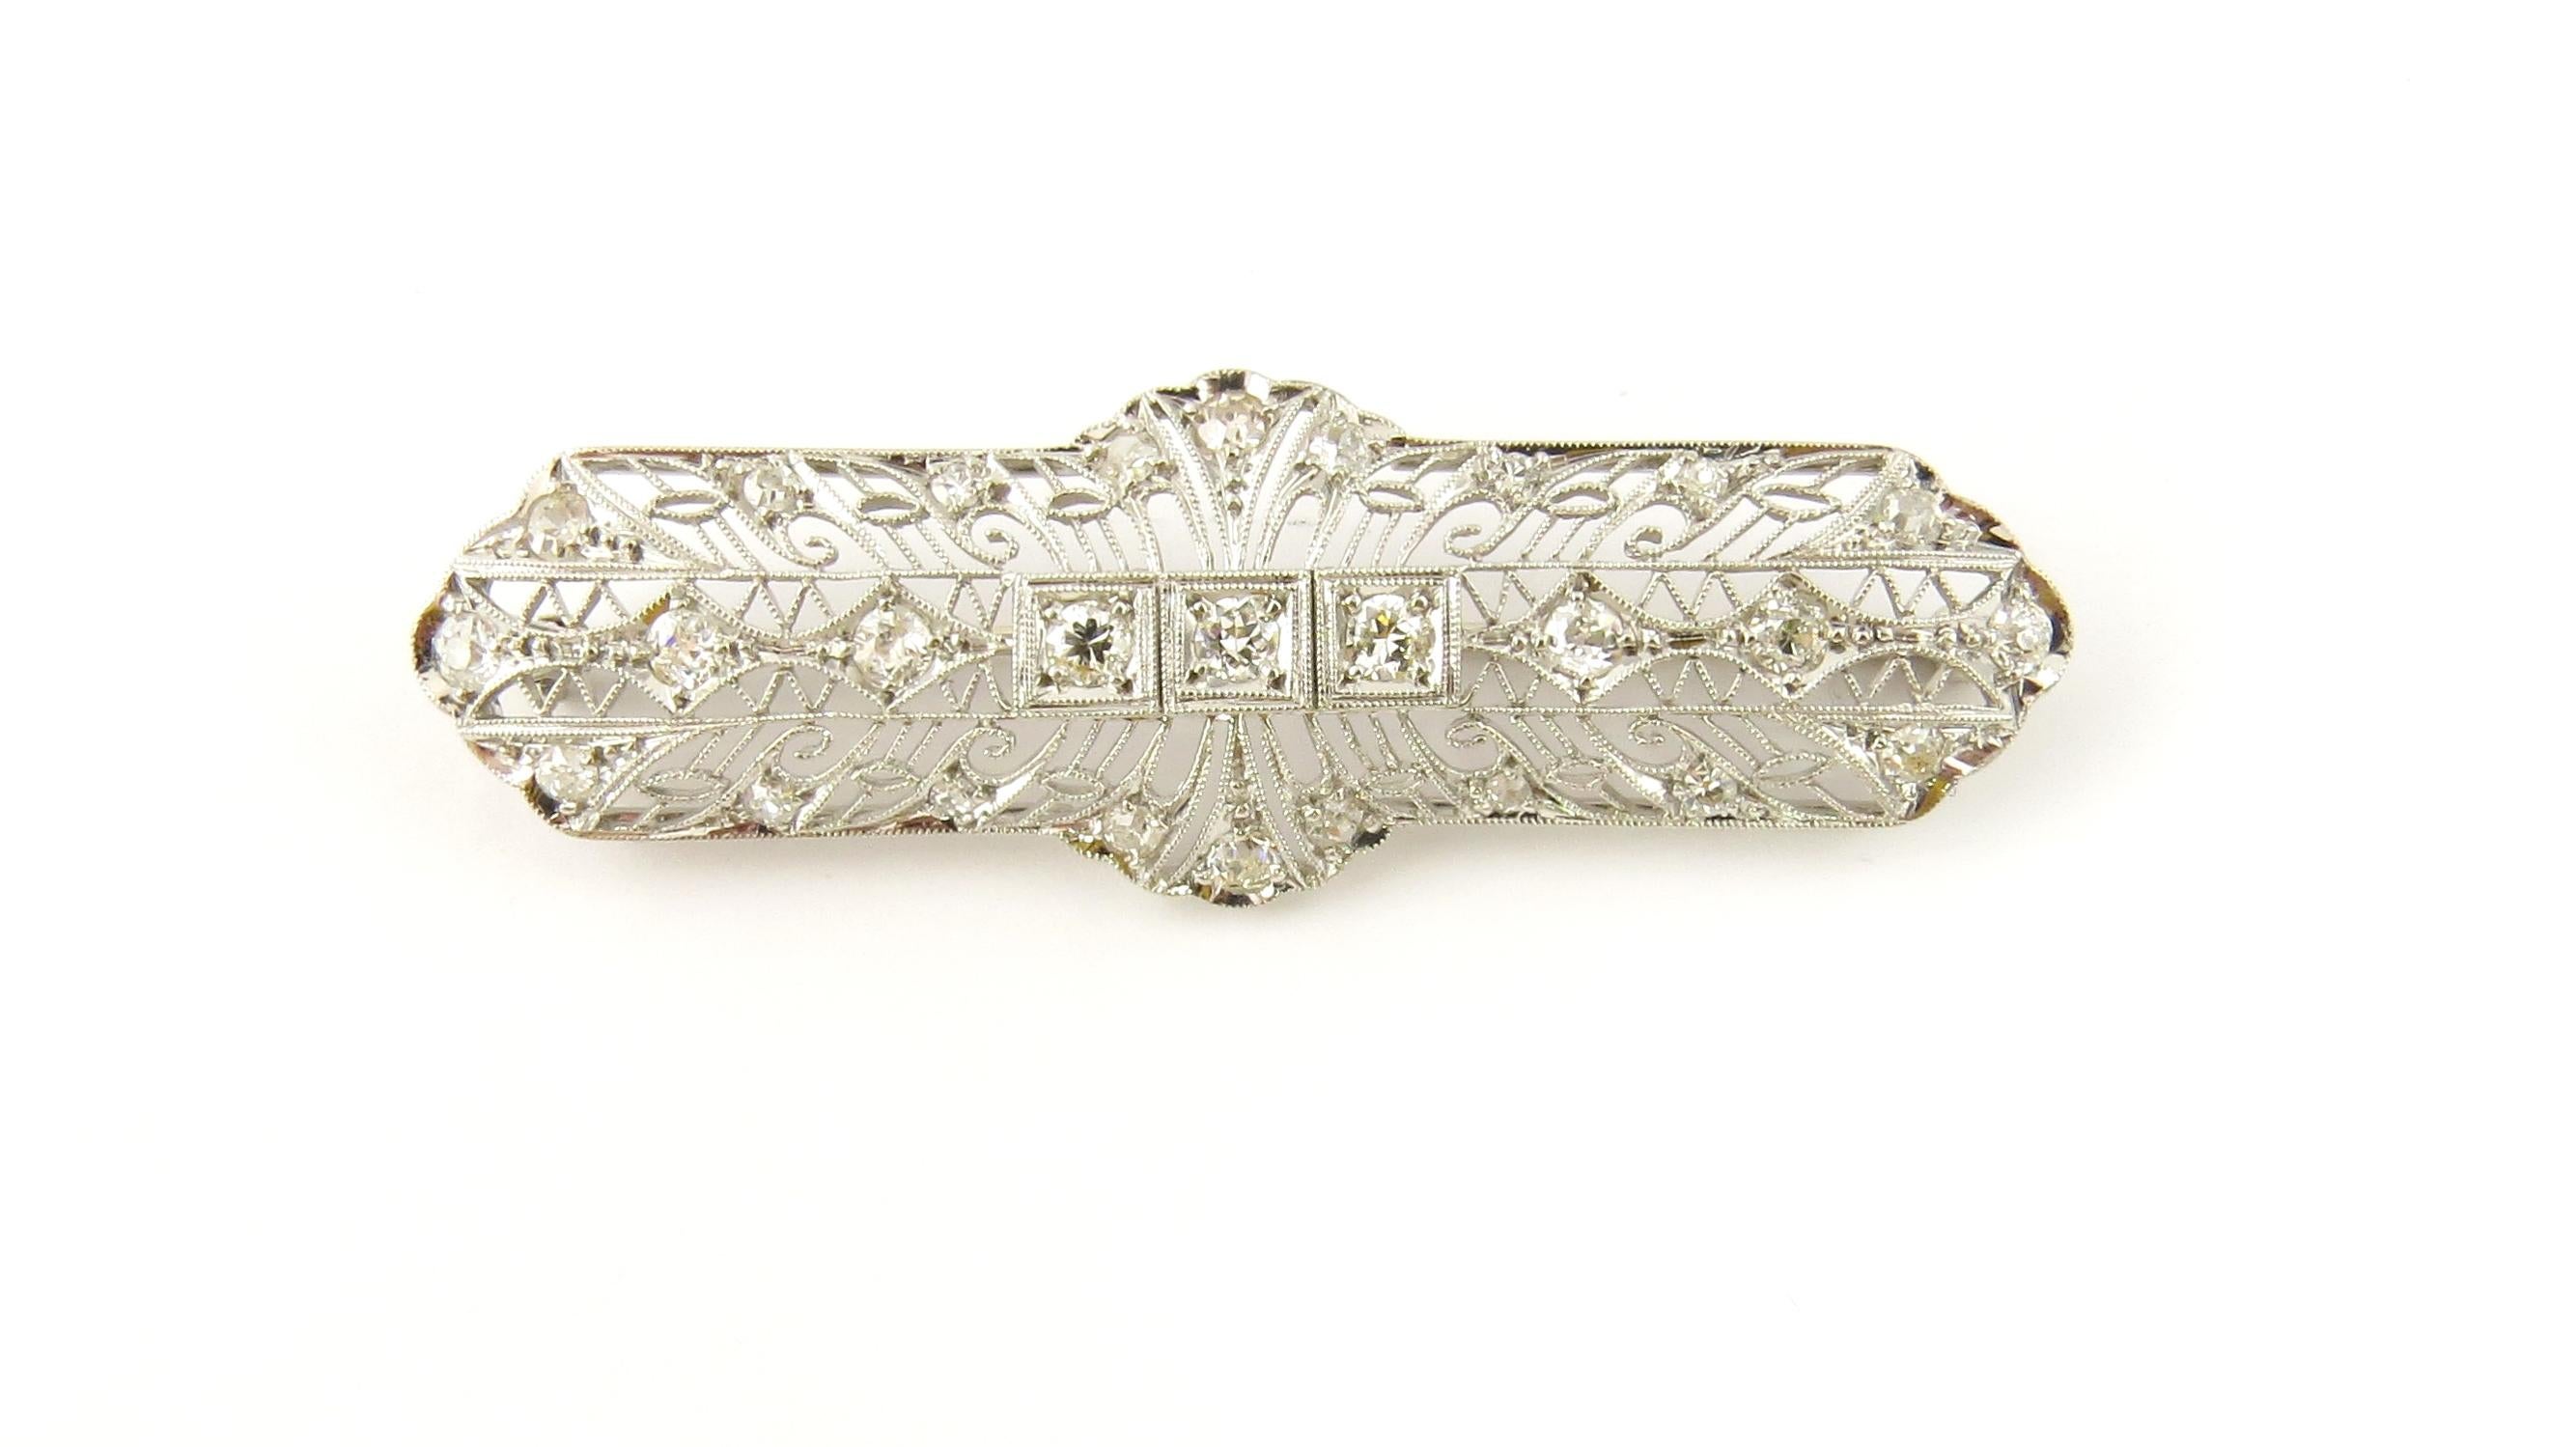 Vintage Platinum and Diamond Bar Pin/Brooch

This exquisite brooch features three round brilliant cut diamonds in its center (.08 ct. each), 12 old mine cut diamonds (.04 ct. each) and 12 single cut diamonds (.01 ct. each) set in beautifully